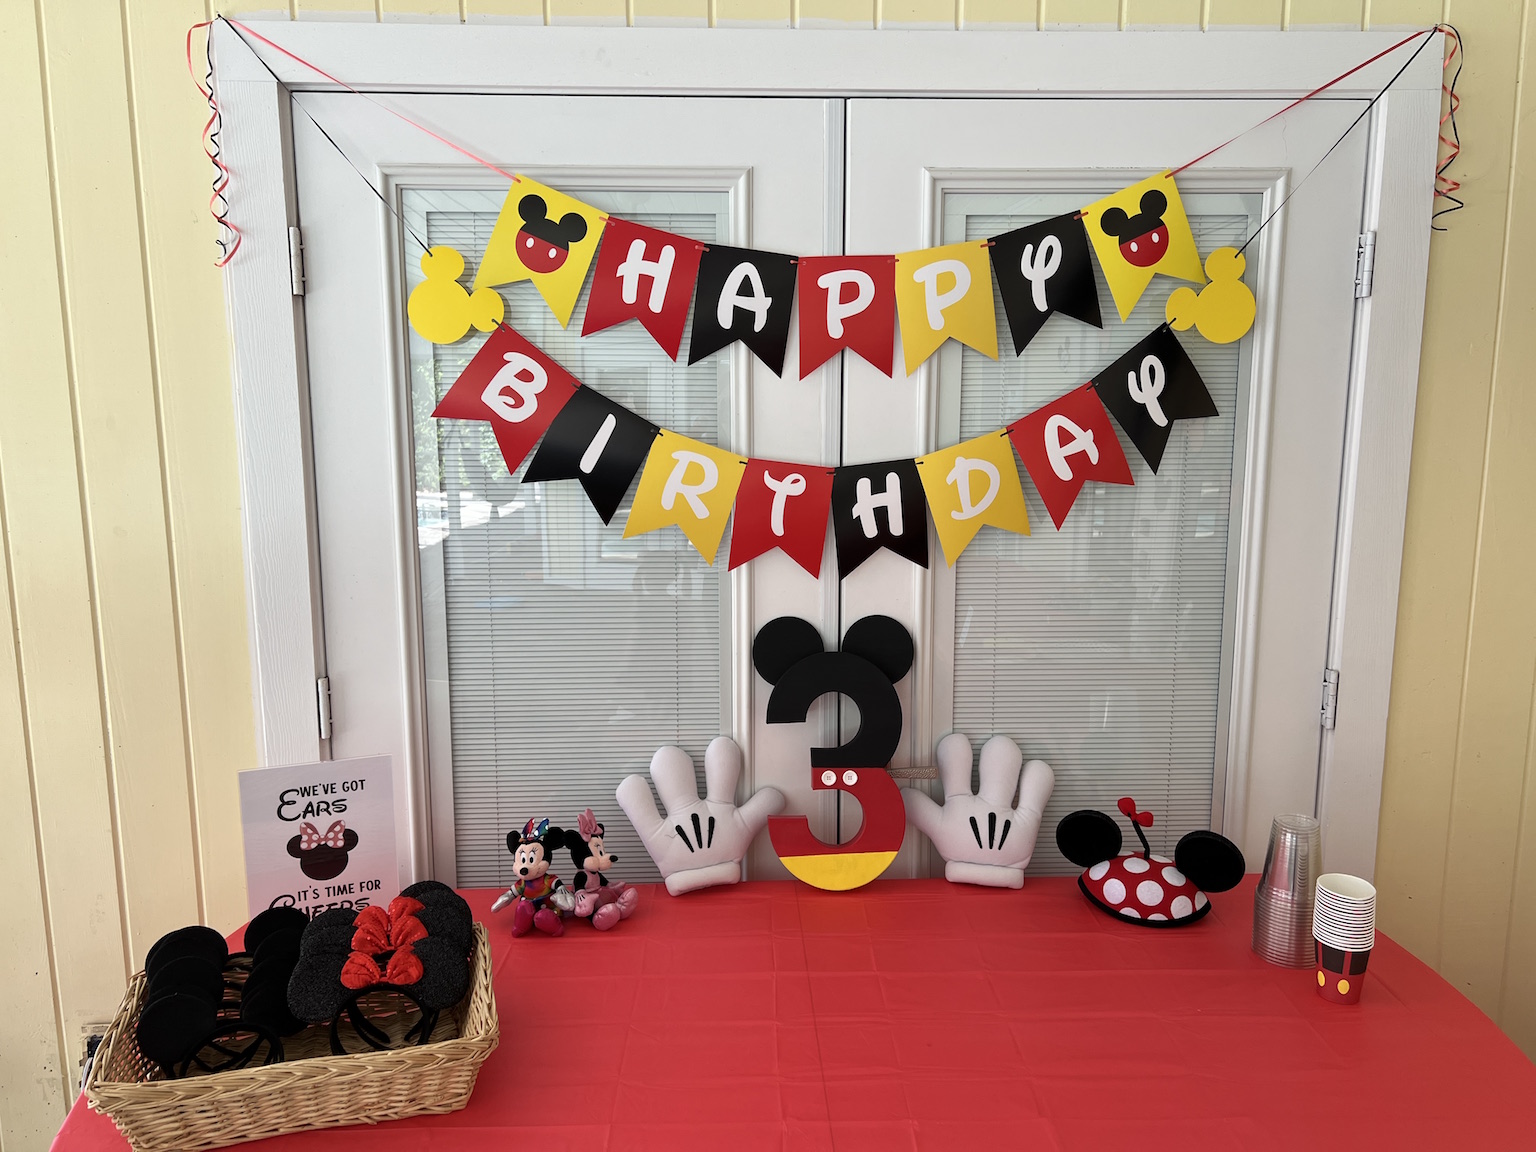 Party banners & do-able decor at Pepper's Magical "Mickey & Minnie Mouse" 3rd Birthday Pool Party | Creative ideas for hosting a magical Mickey & Minnie themed birthday bash for your little Mouseketeer with do-able decor, punny snacks, and party games that are fun for all ages! via thinkingcloset.com